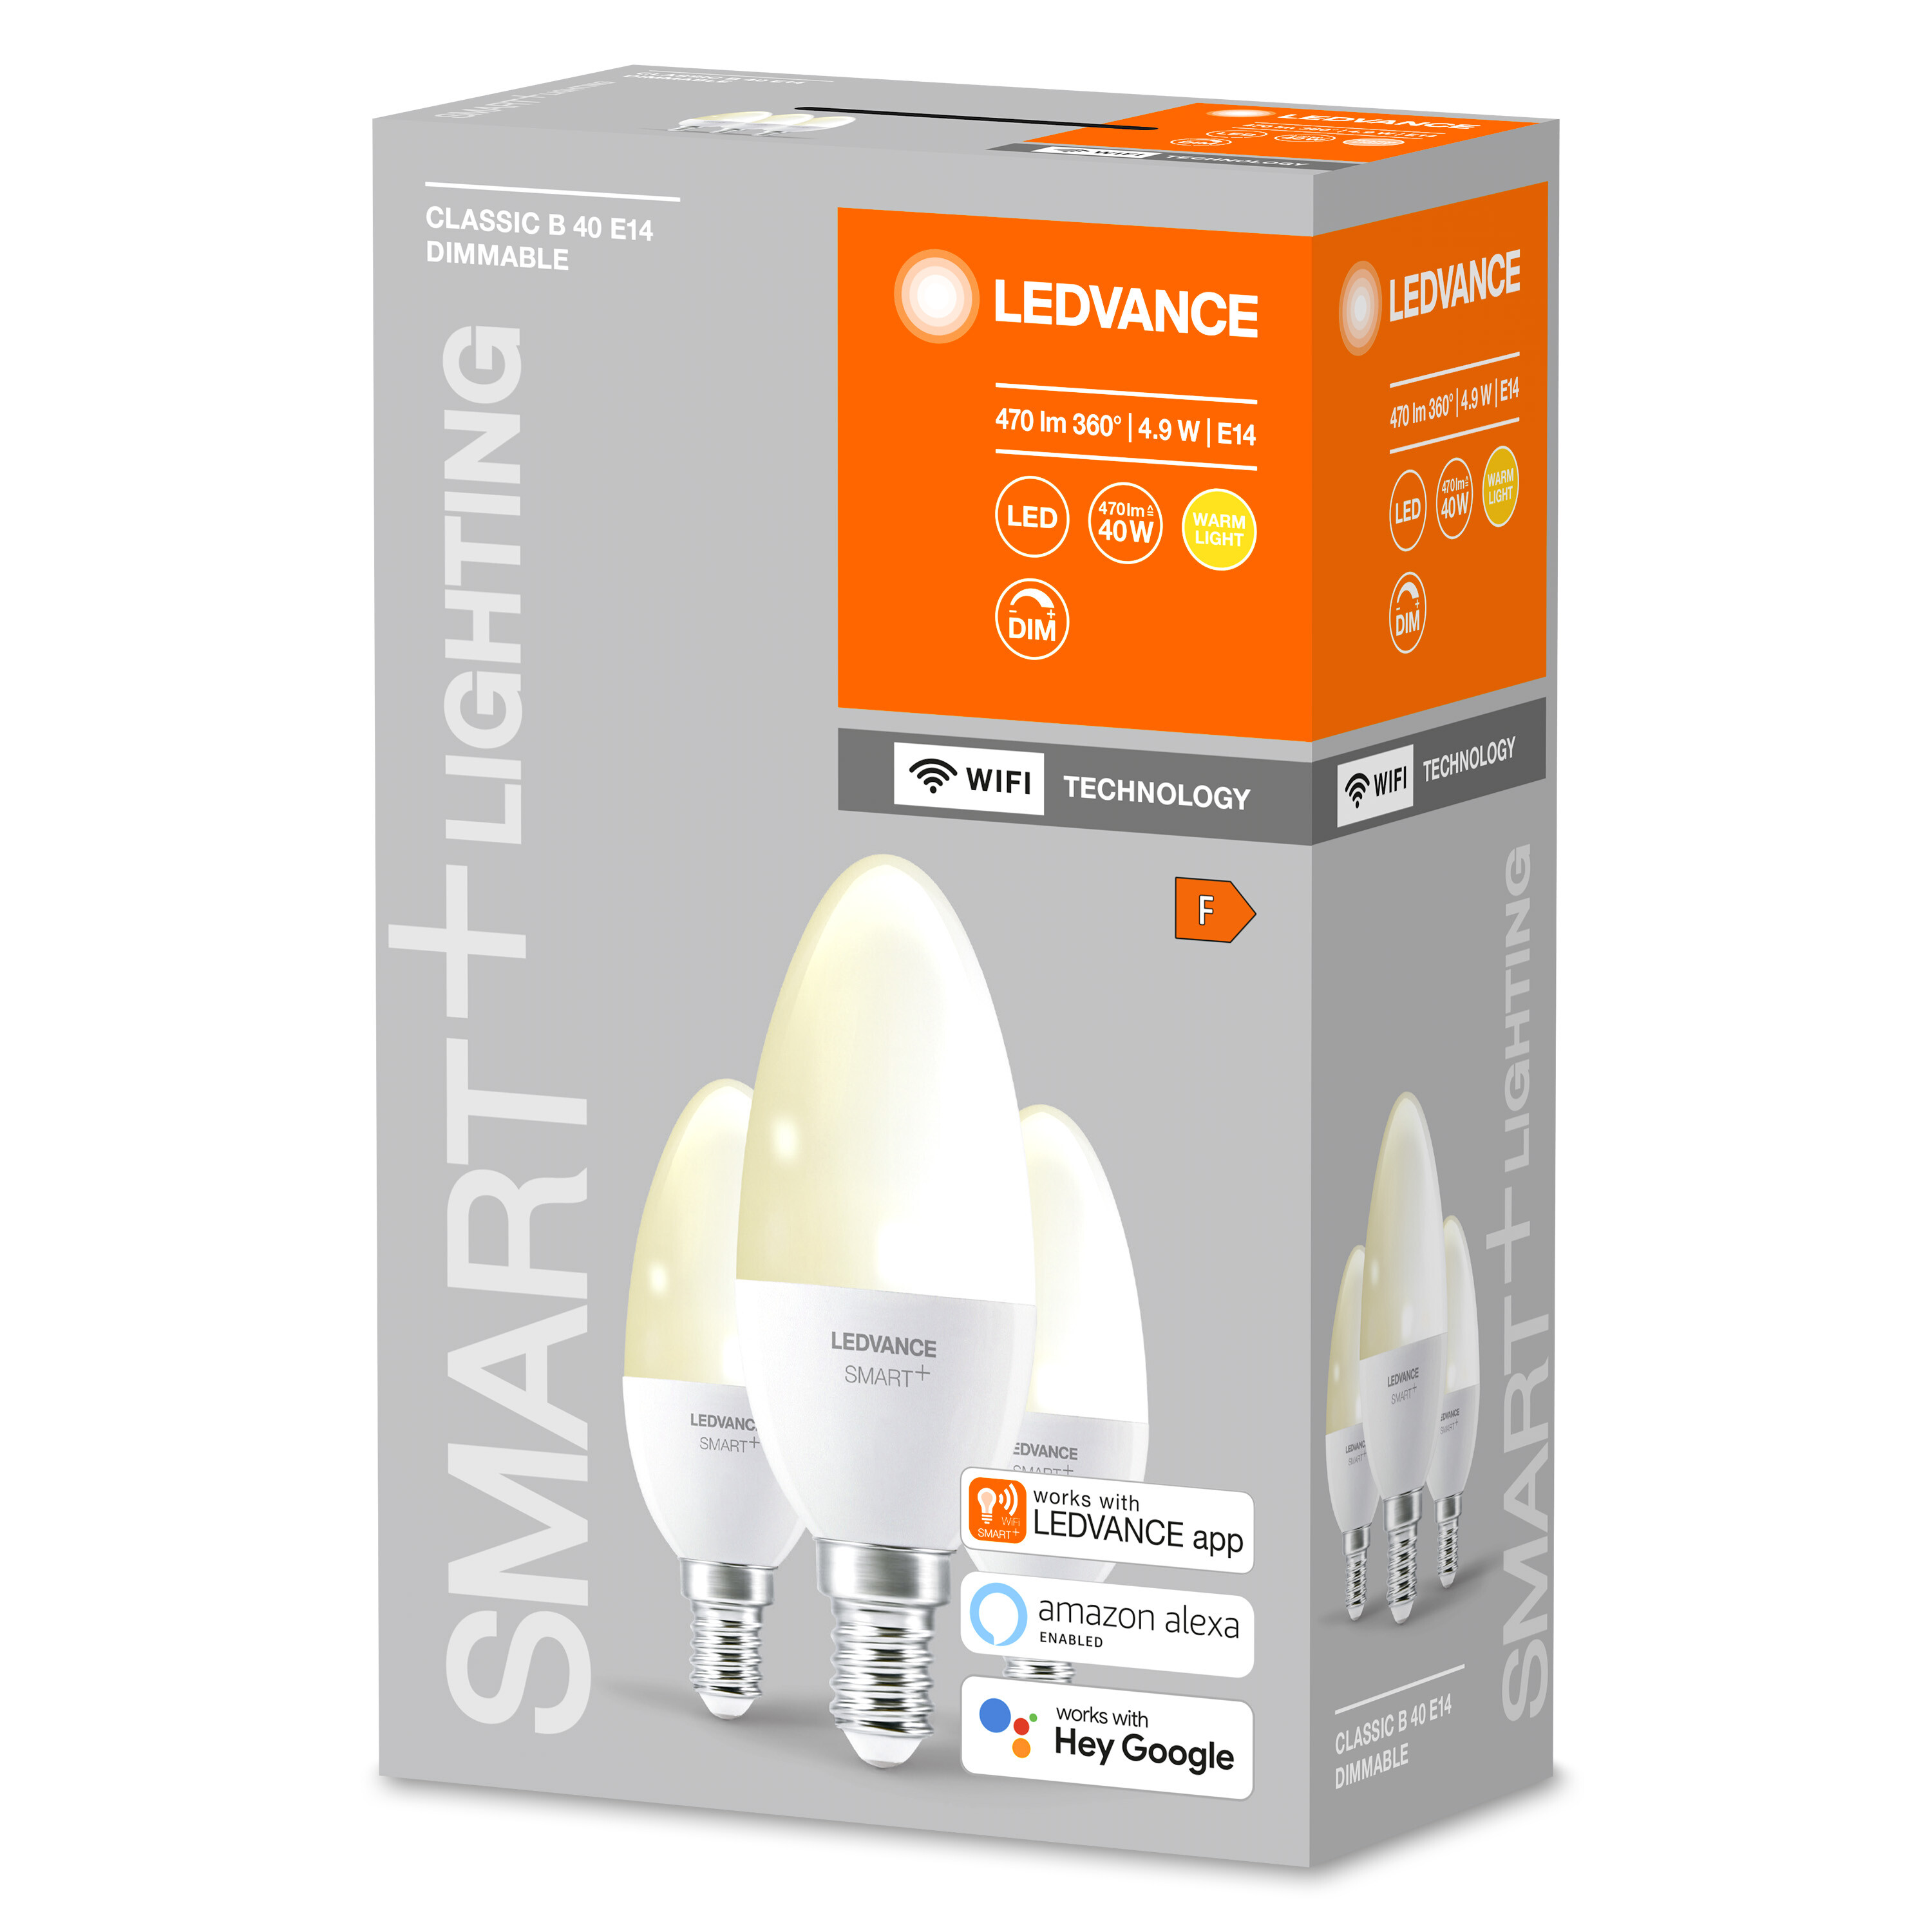 LEDVANCE SMART+ WiFi LED Dimmable Lampe Candle Warmweiß